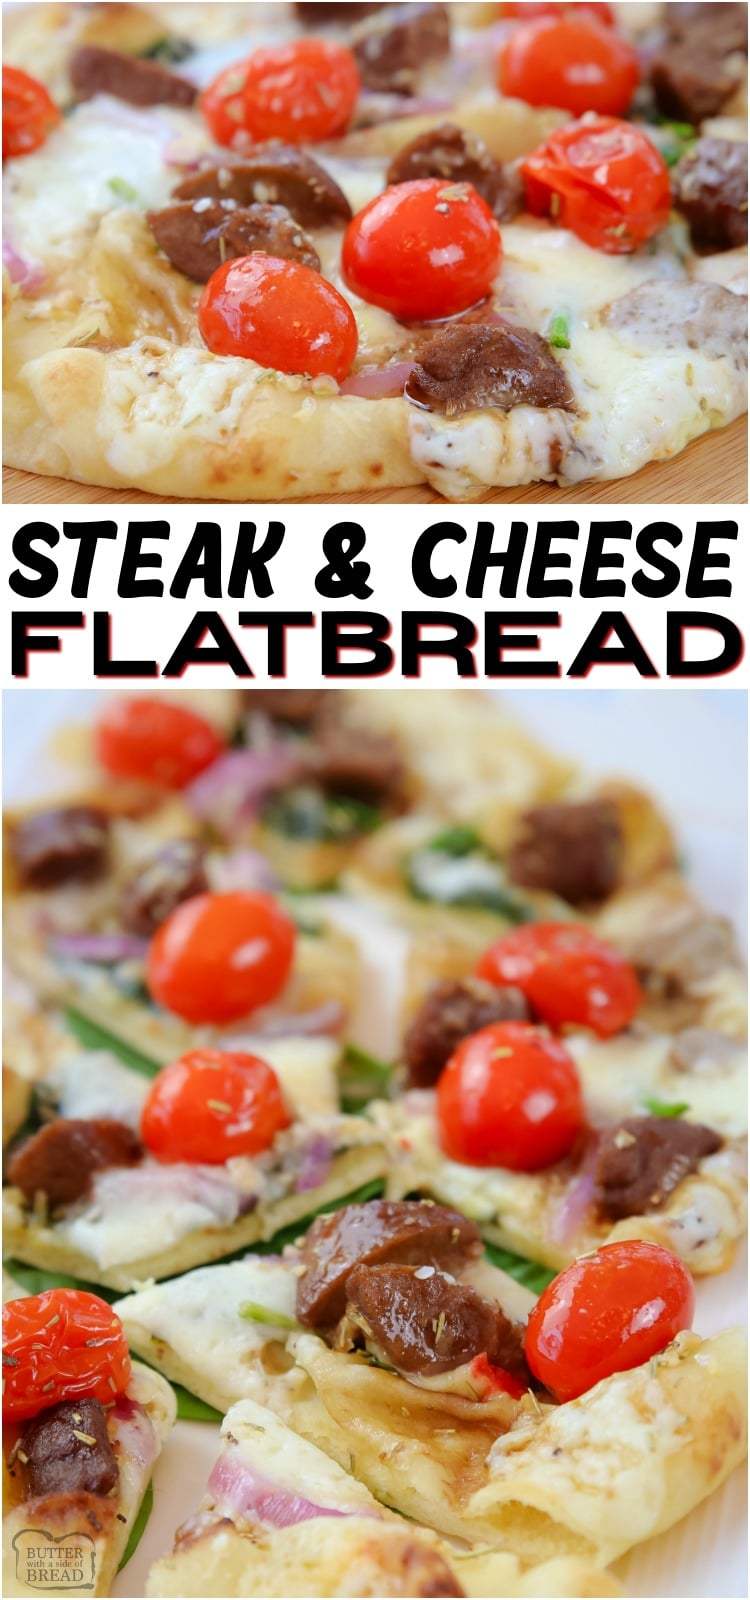 Steak and Cheese Flatbread perfect for appetizers or an easy dinner! Soft flatbread topped with steak bites, cheese, cherry tomatoes, red onion and fresh spinach. #flatbread #steak #cheese #appetizer #dinner #recipe from BUTTER WITH A SIDE OF BREAD